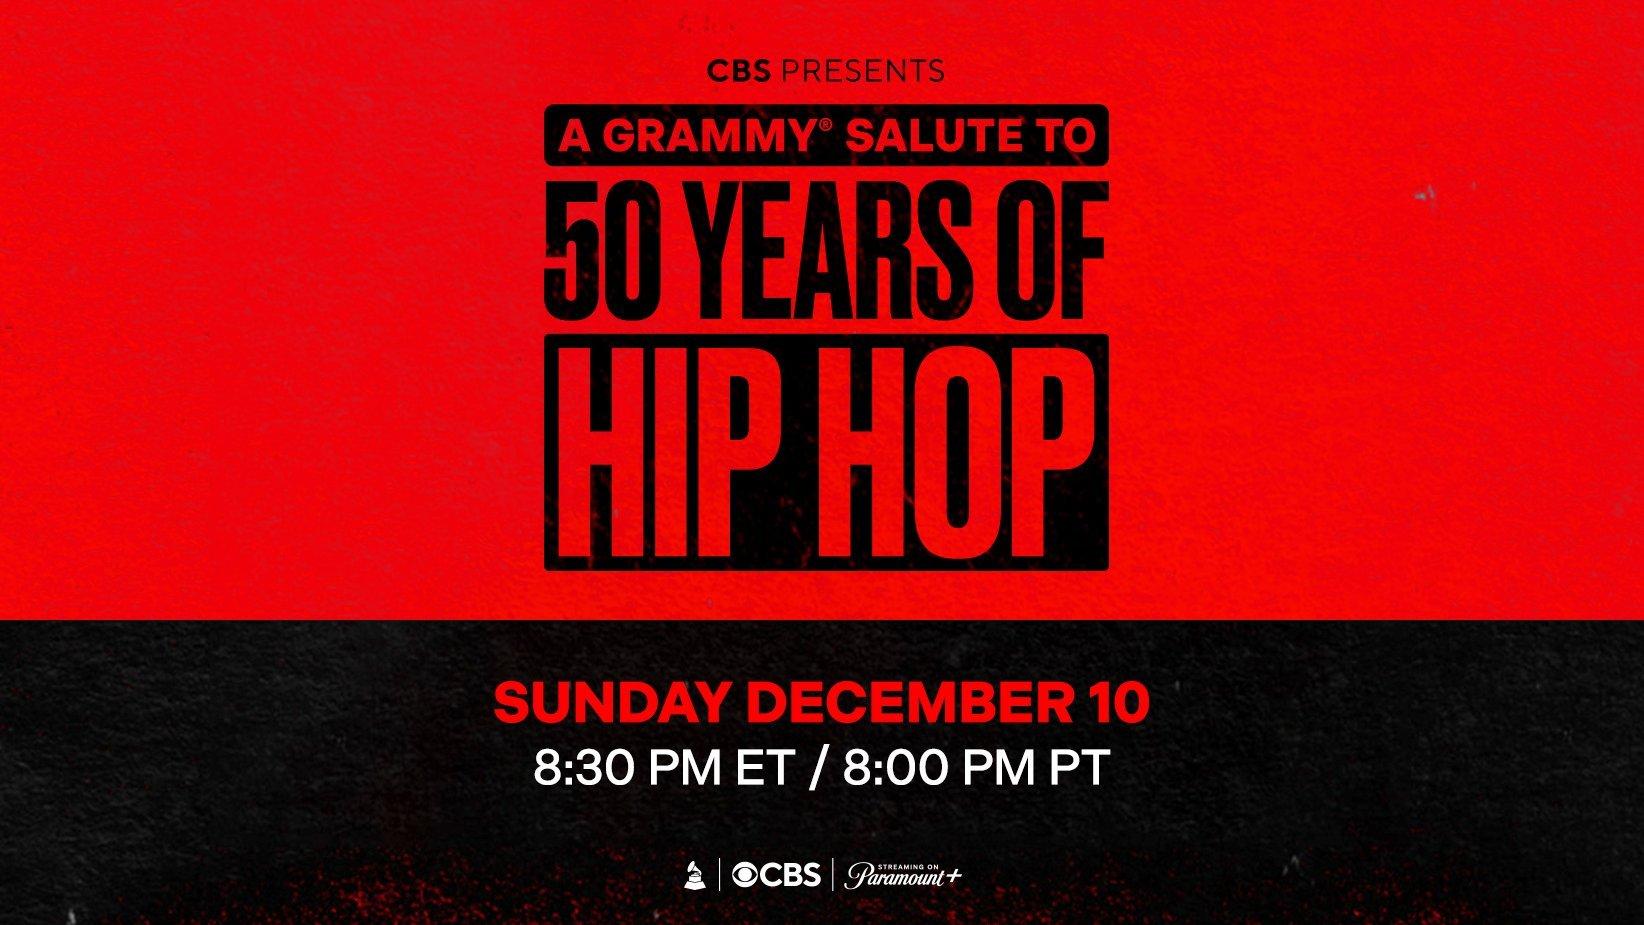 How To Watch "A GRAMMY Salute To 50 Years Of HipHop" Air Date